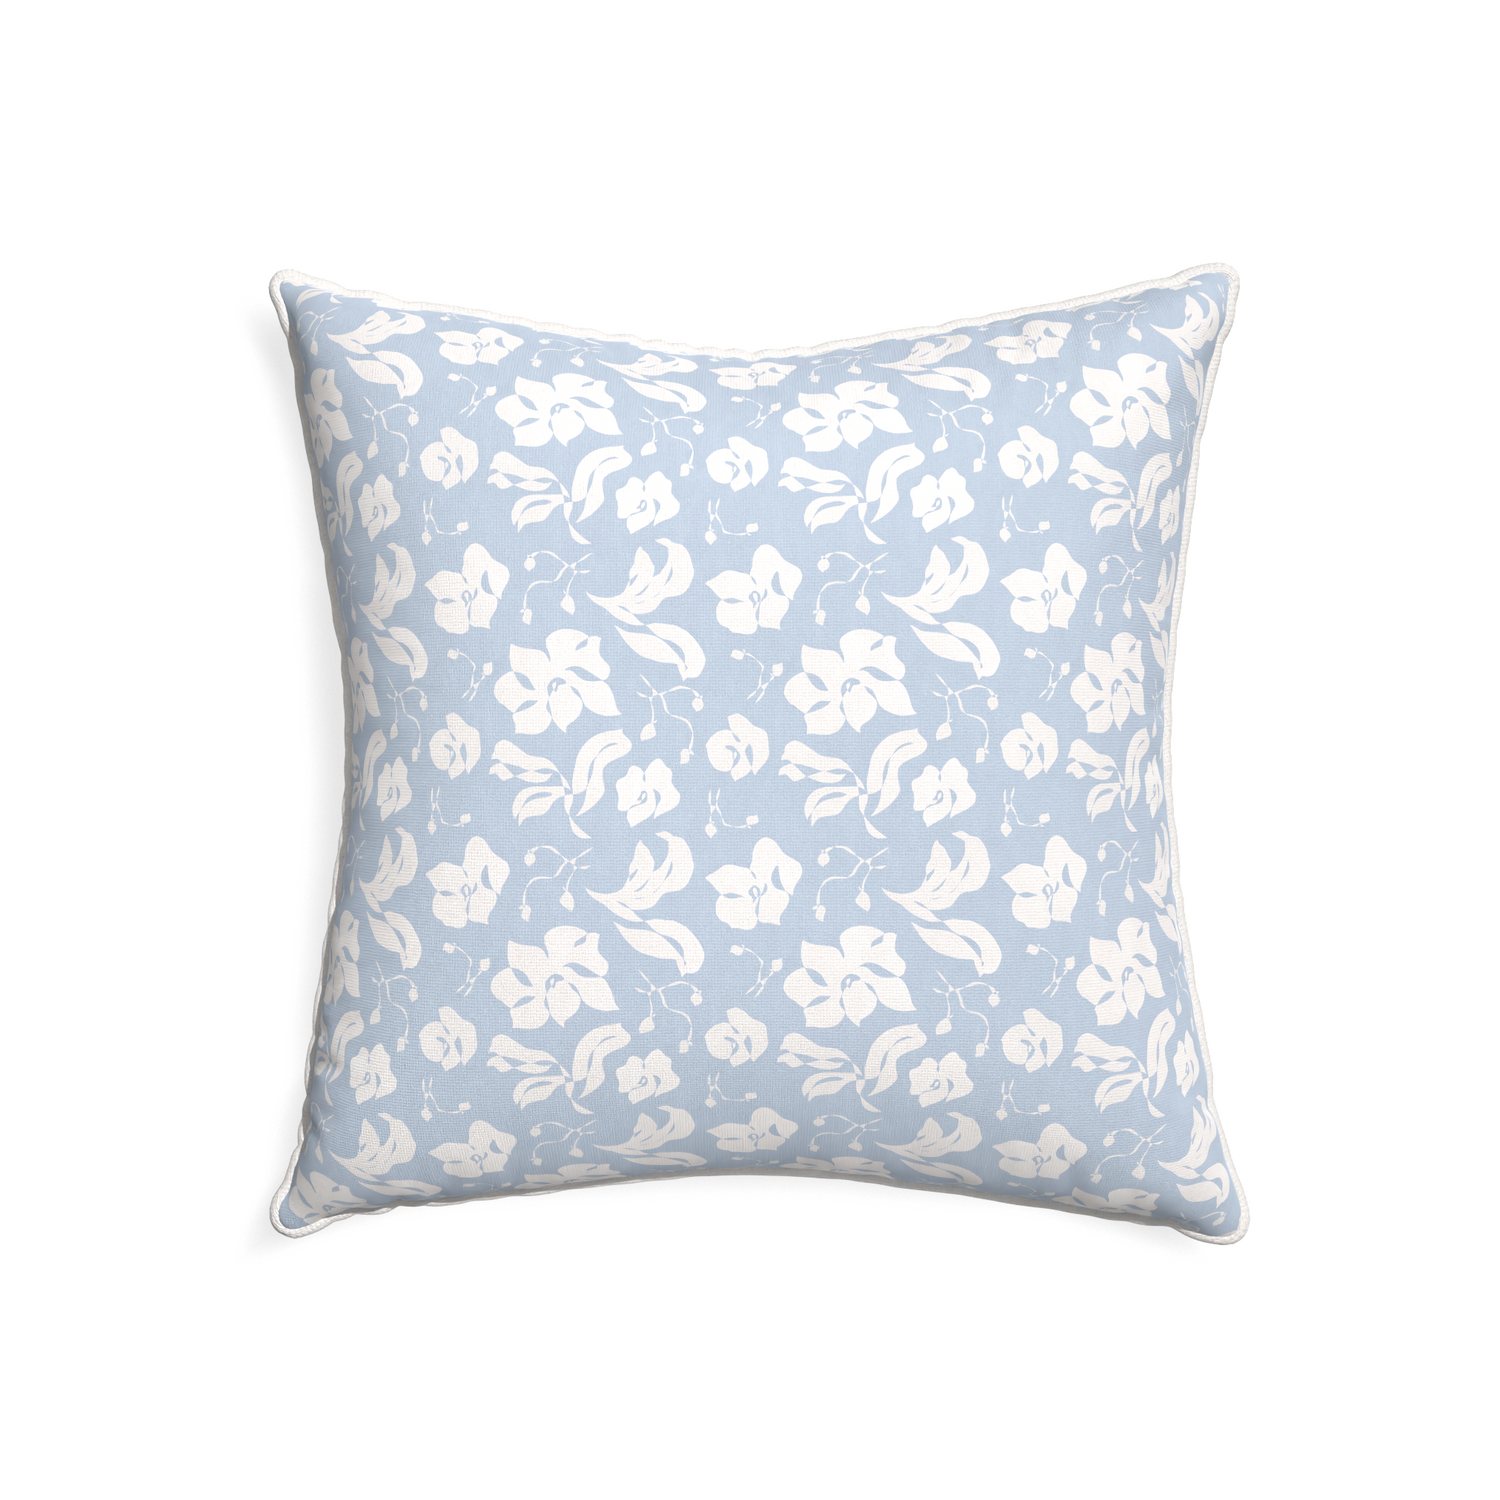 22-square georgia custom cornflower blue floralpillow with snow piping on white background